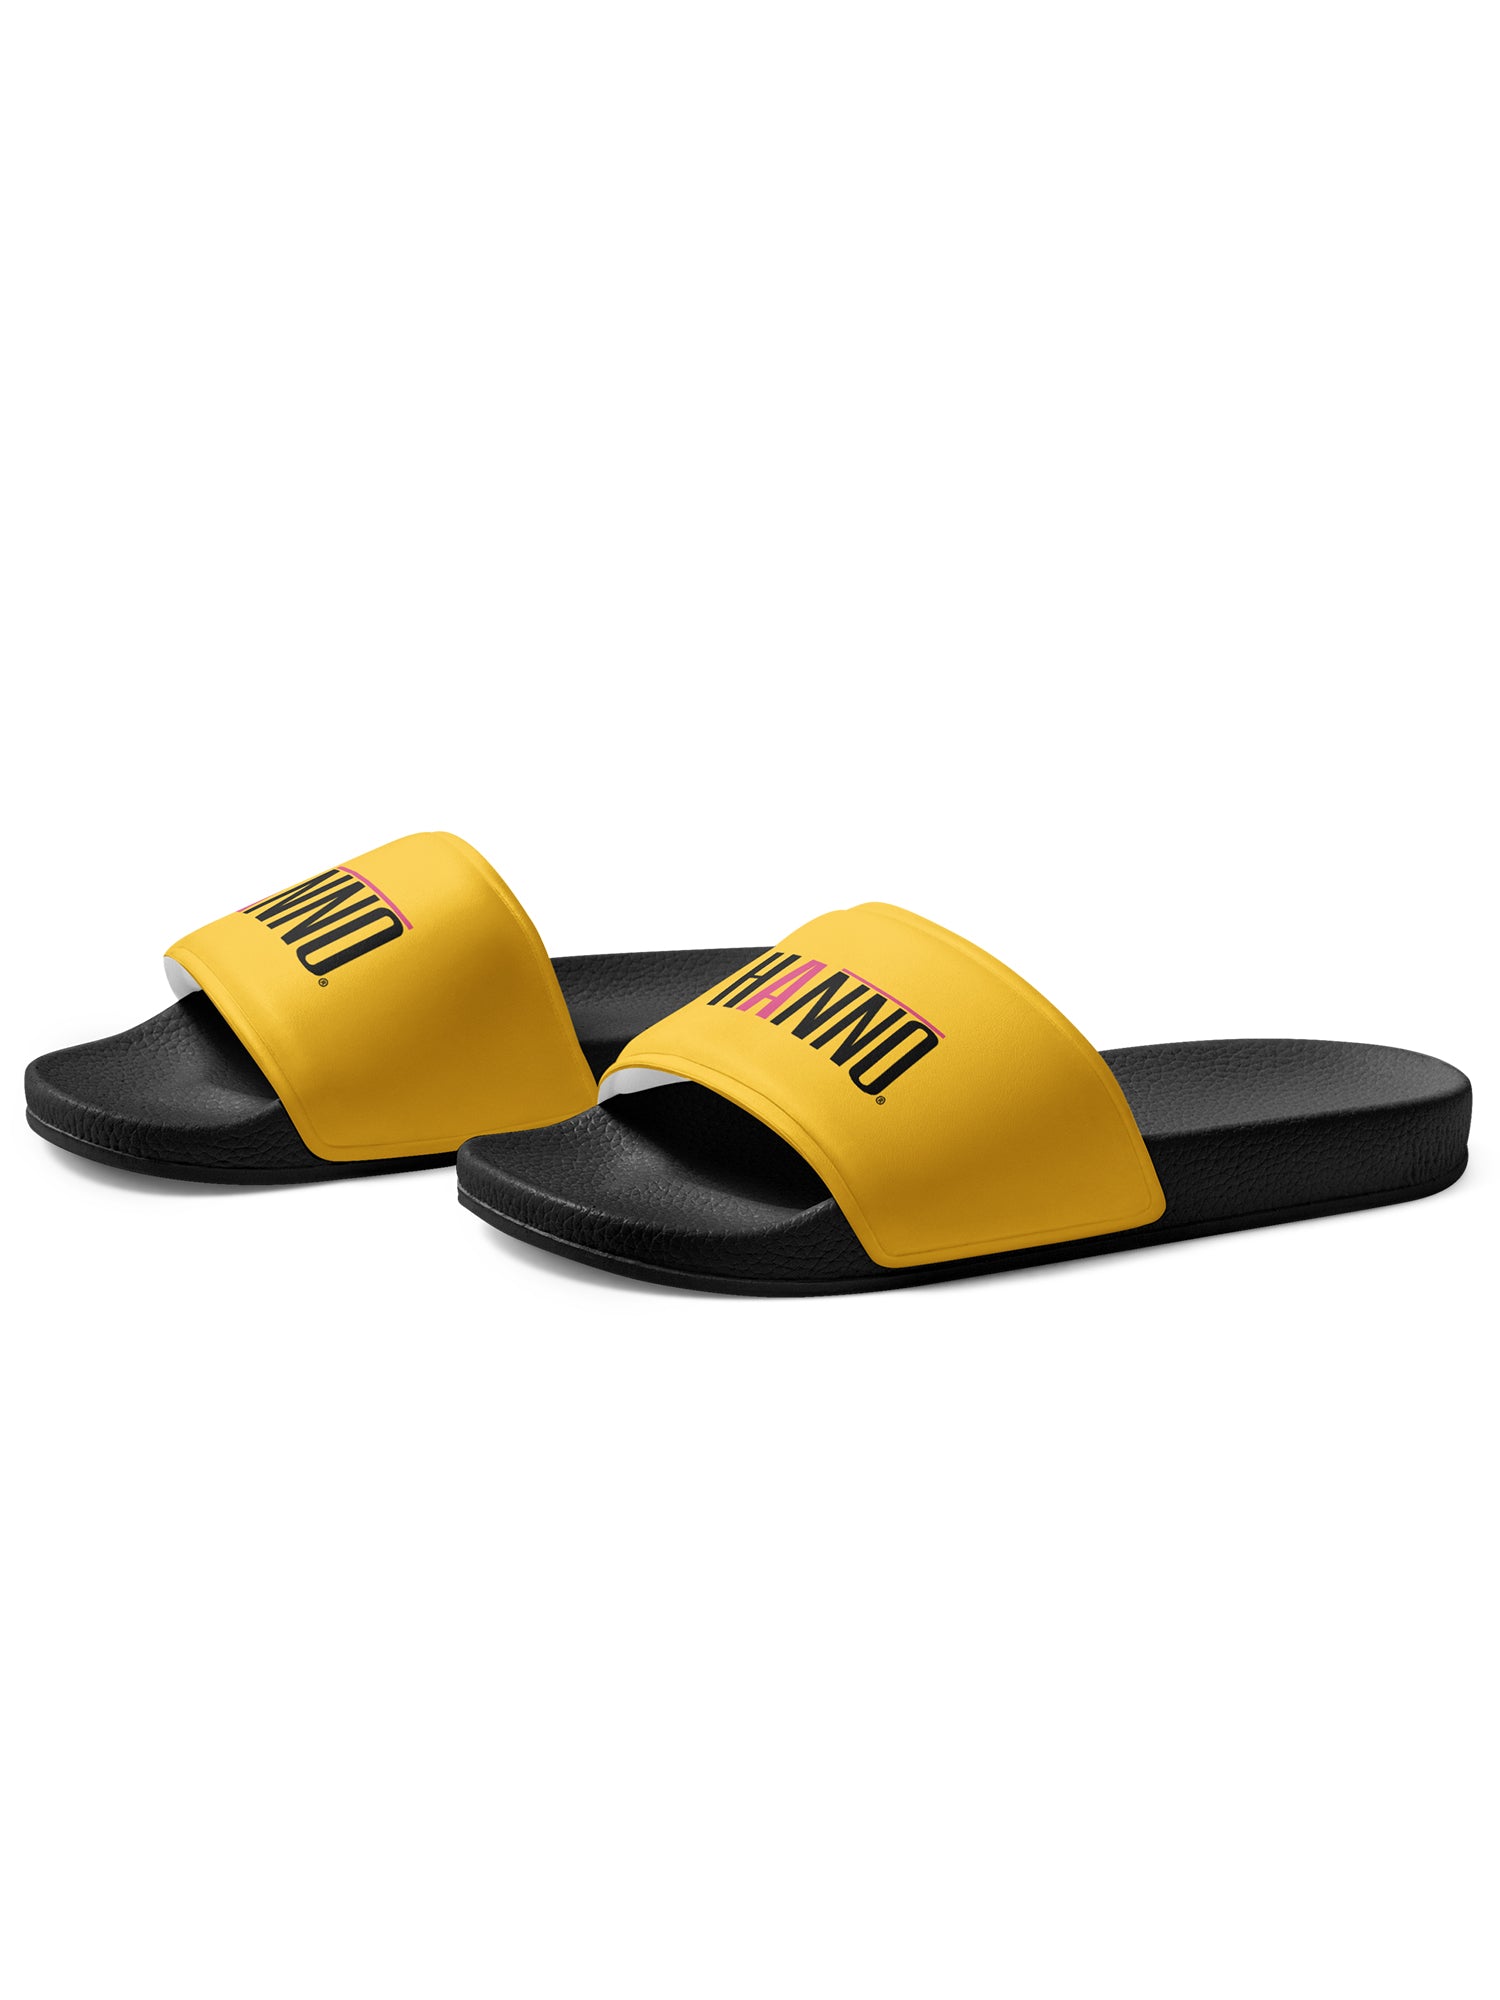 HANNO YELLOW SLIDES FOR HIM